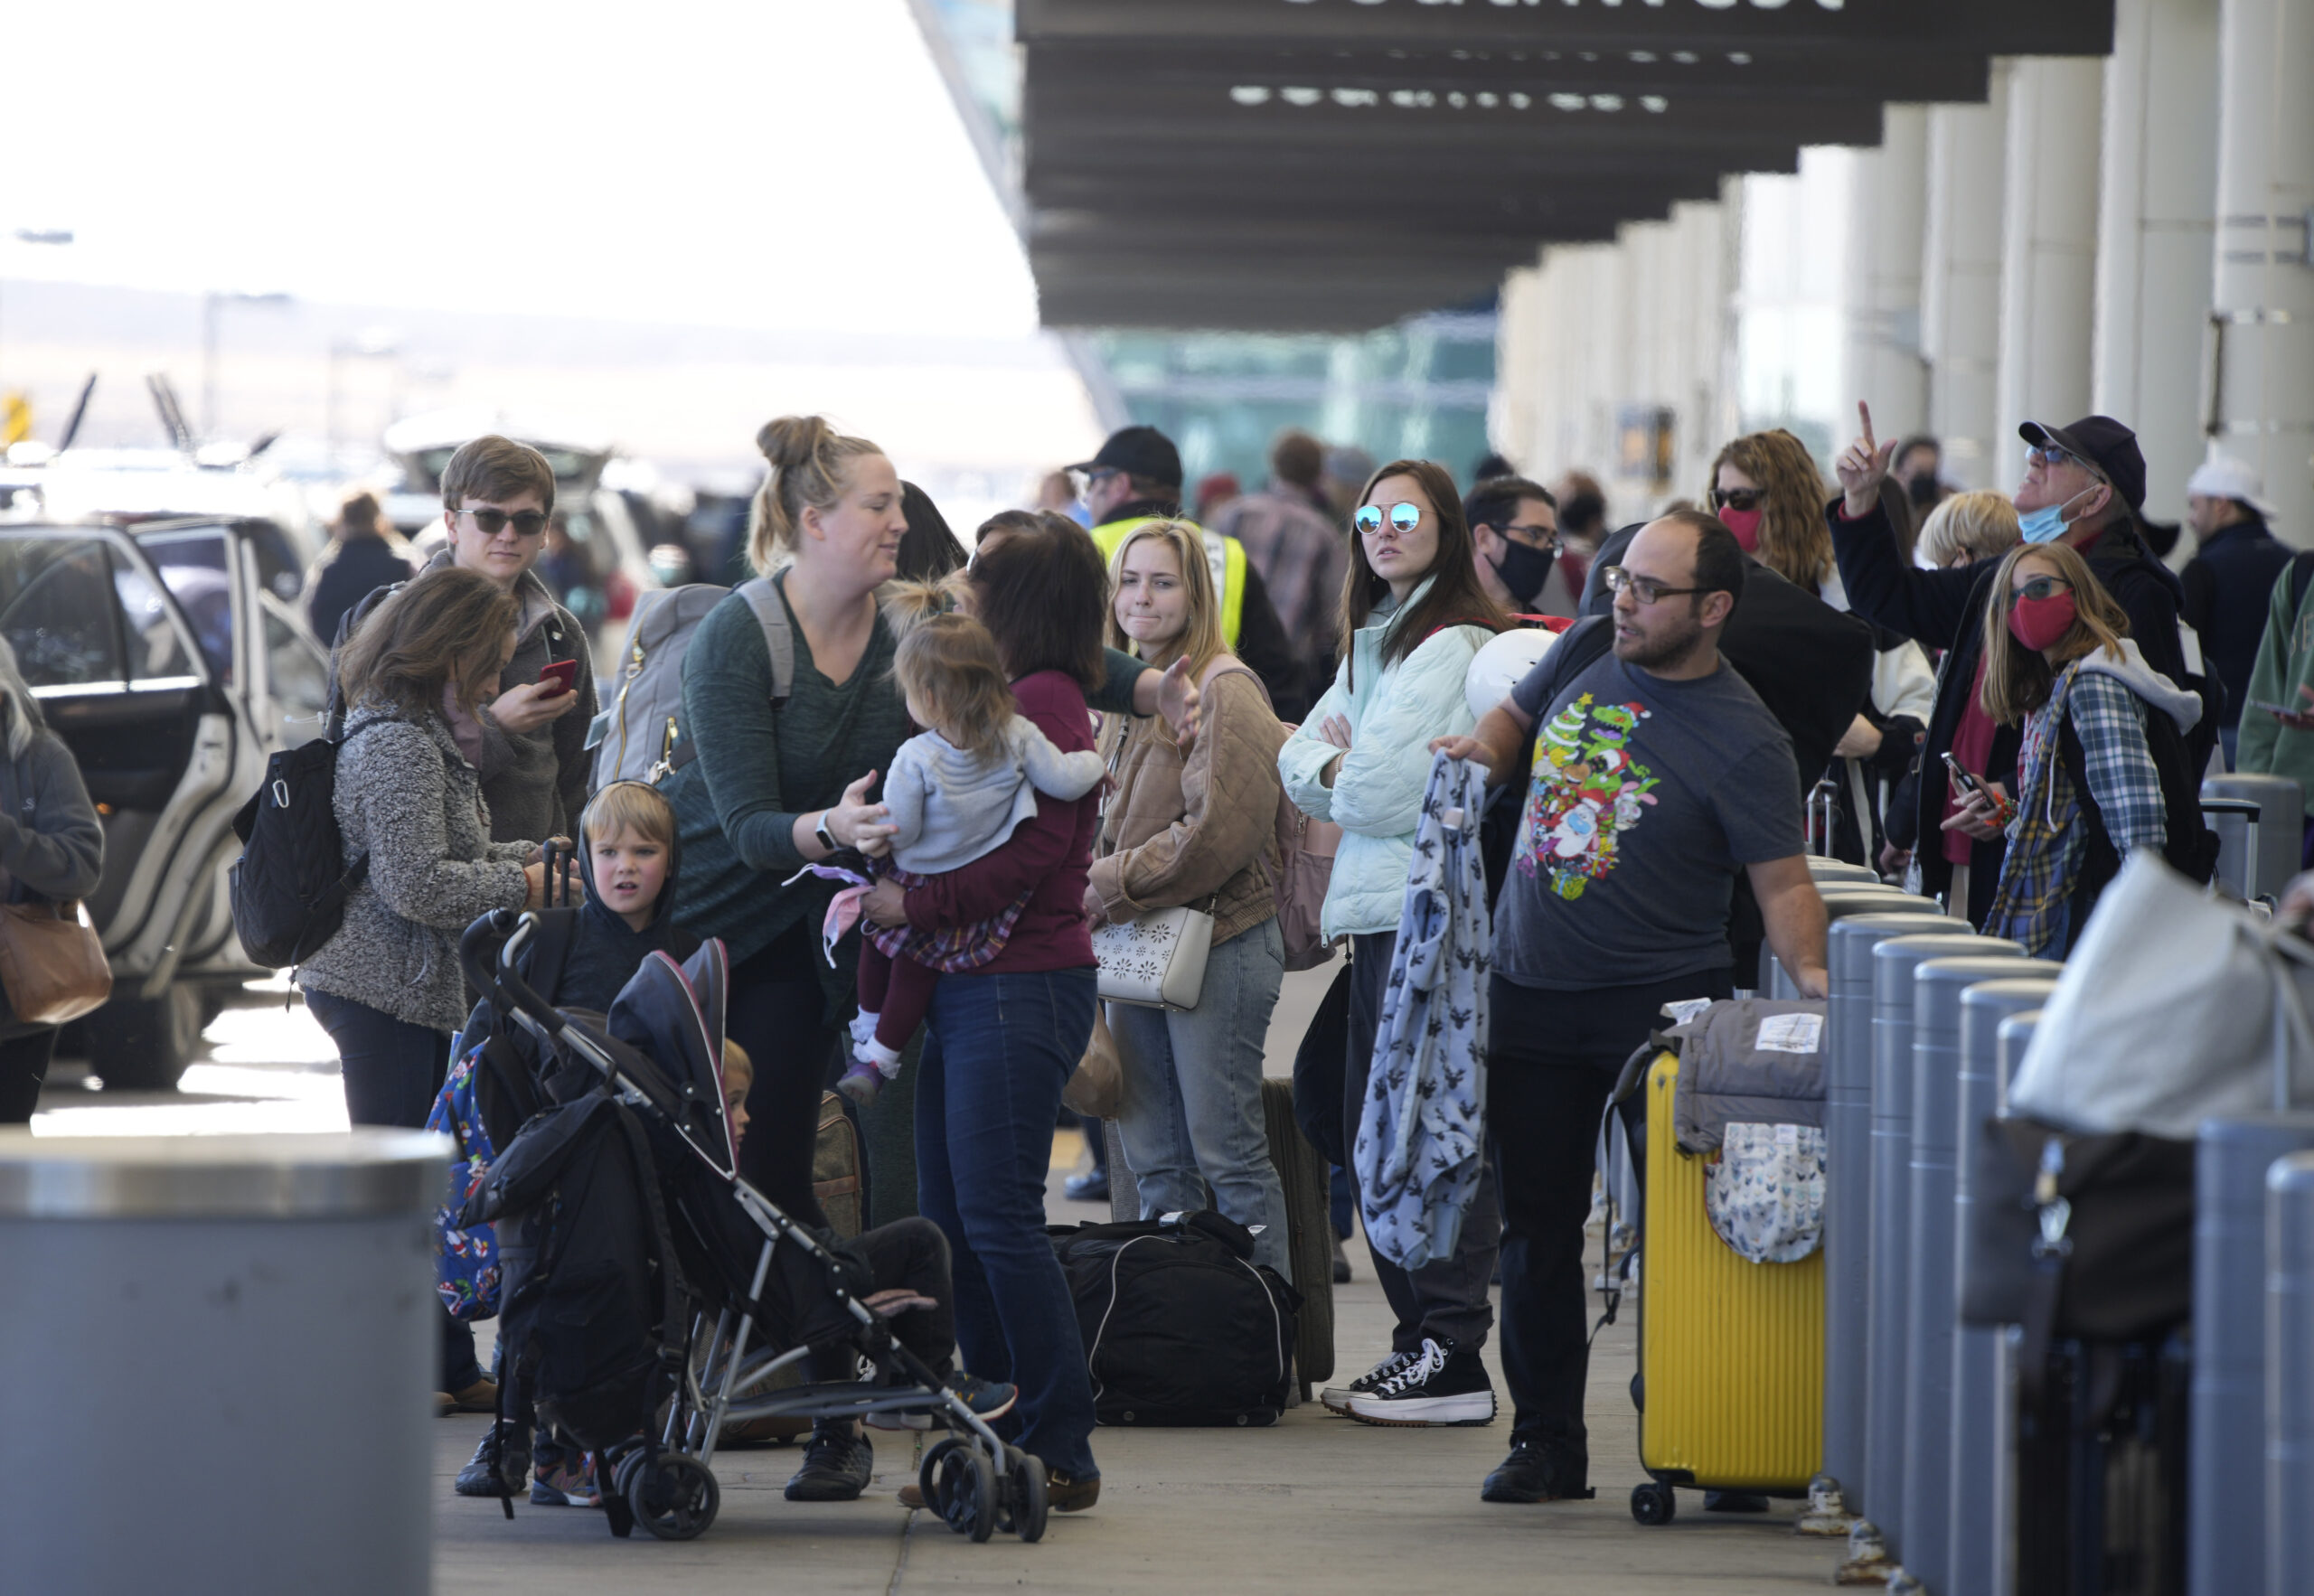 Travelers queue up at the Southwest Airlines curbside check-in area at Denver International Airport Sunday, Dec. 26, 2021, in Denver. Airlines canceled hundreds of flights Sunday, citing staffing problems tied to COVID-19 to extend the nation's travel problems beyond Christmas. (AP Photo/David Zalubowski)